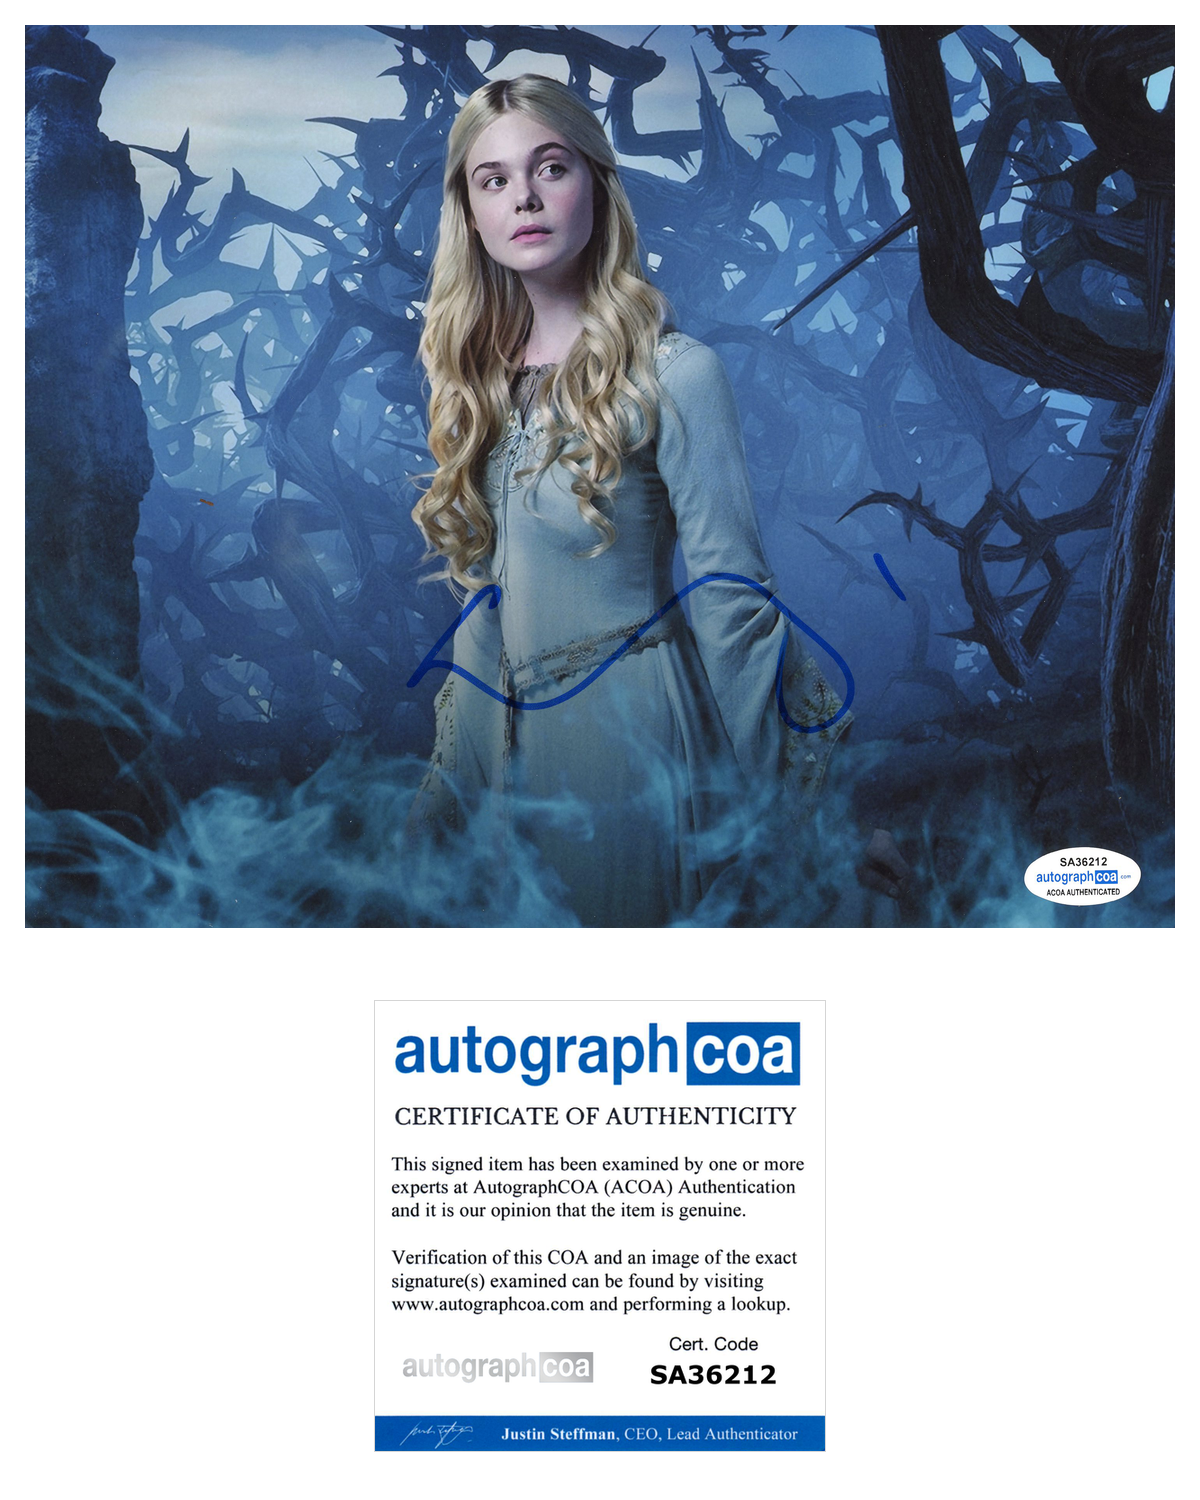 Elle Fanning Signed Autographed 8x10 Photo Poster painting Maleficent Actress ACOA COA